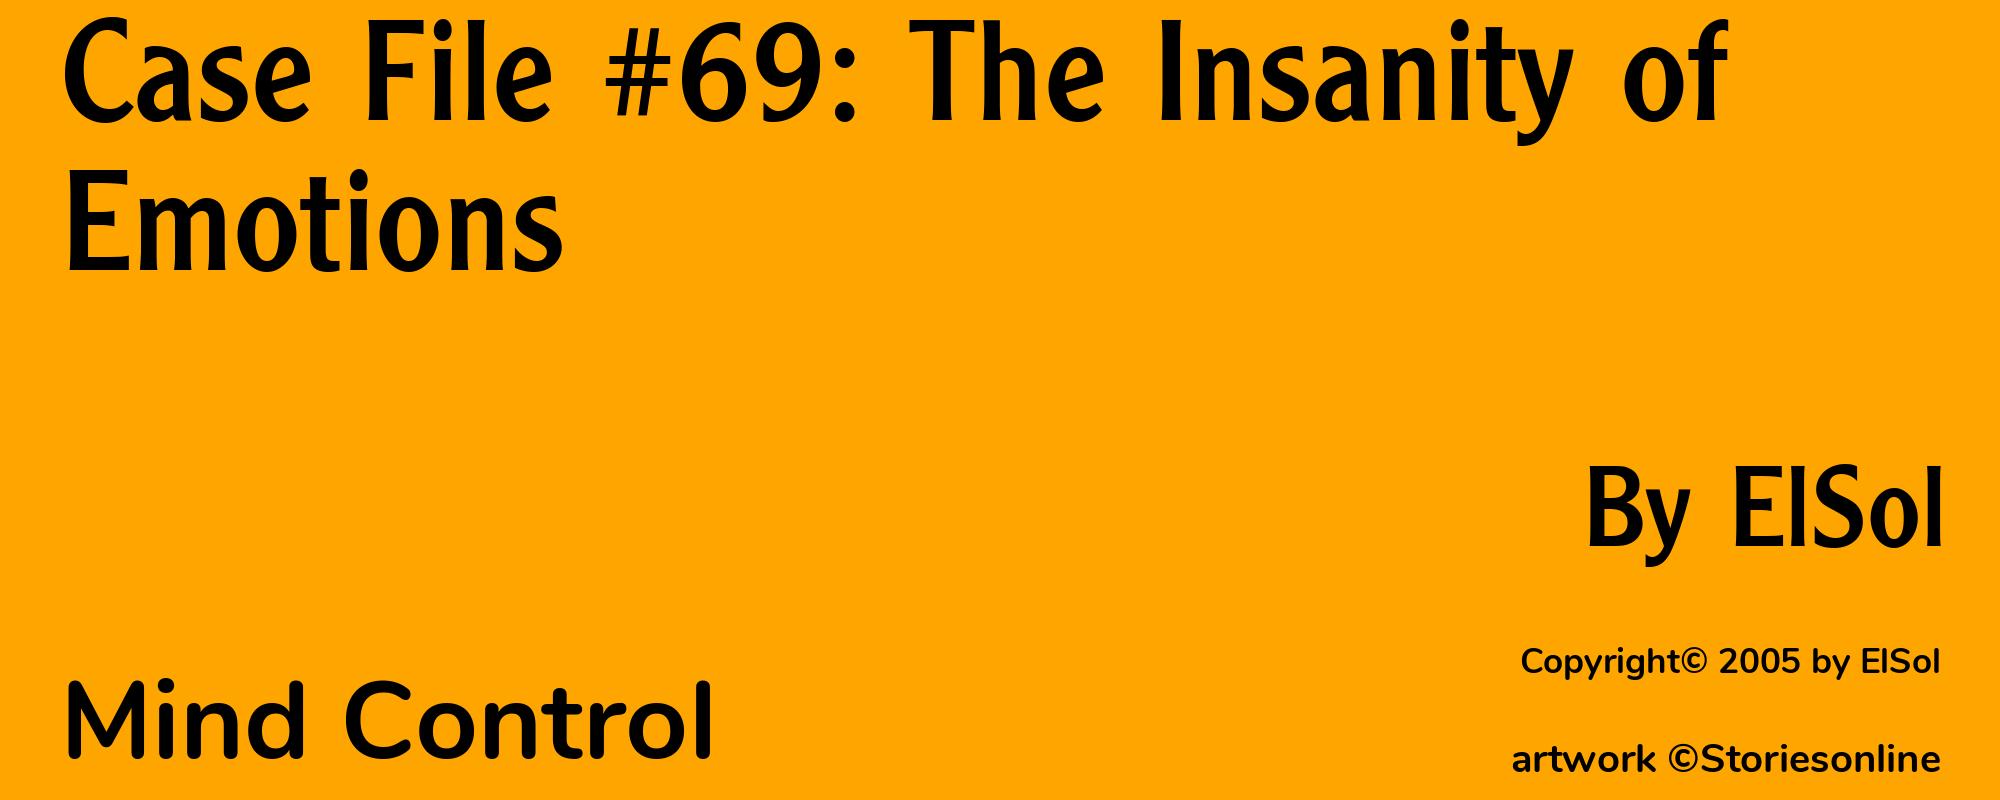 Case File #69: The Insanity of Emotions - Cover